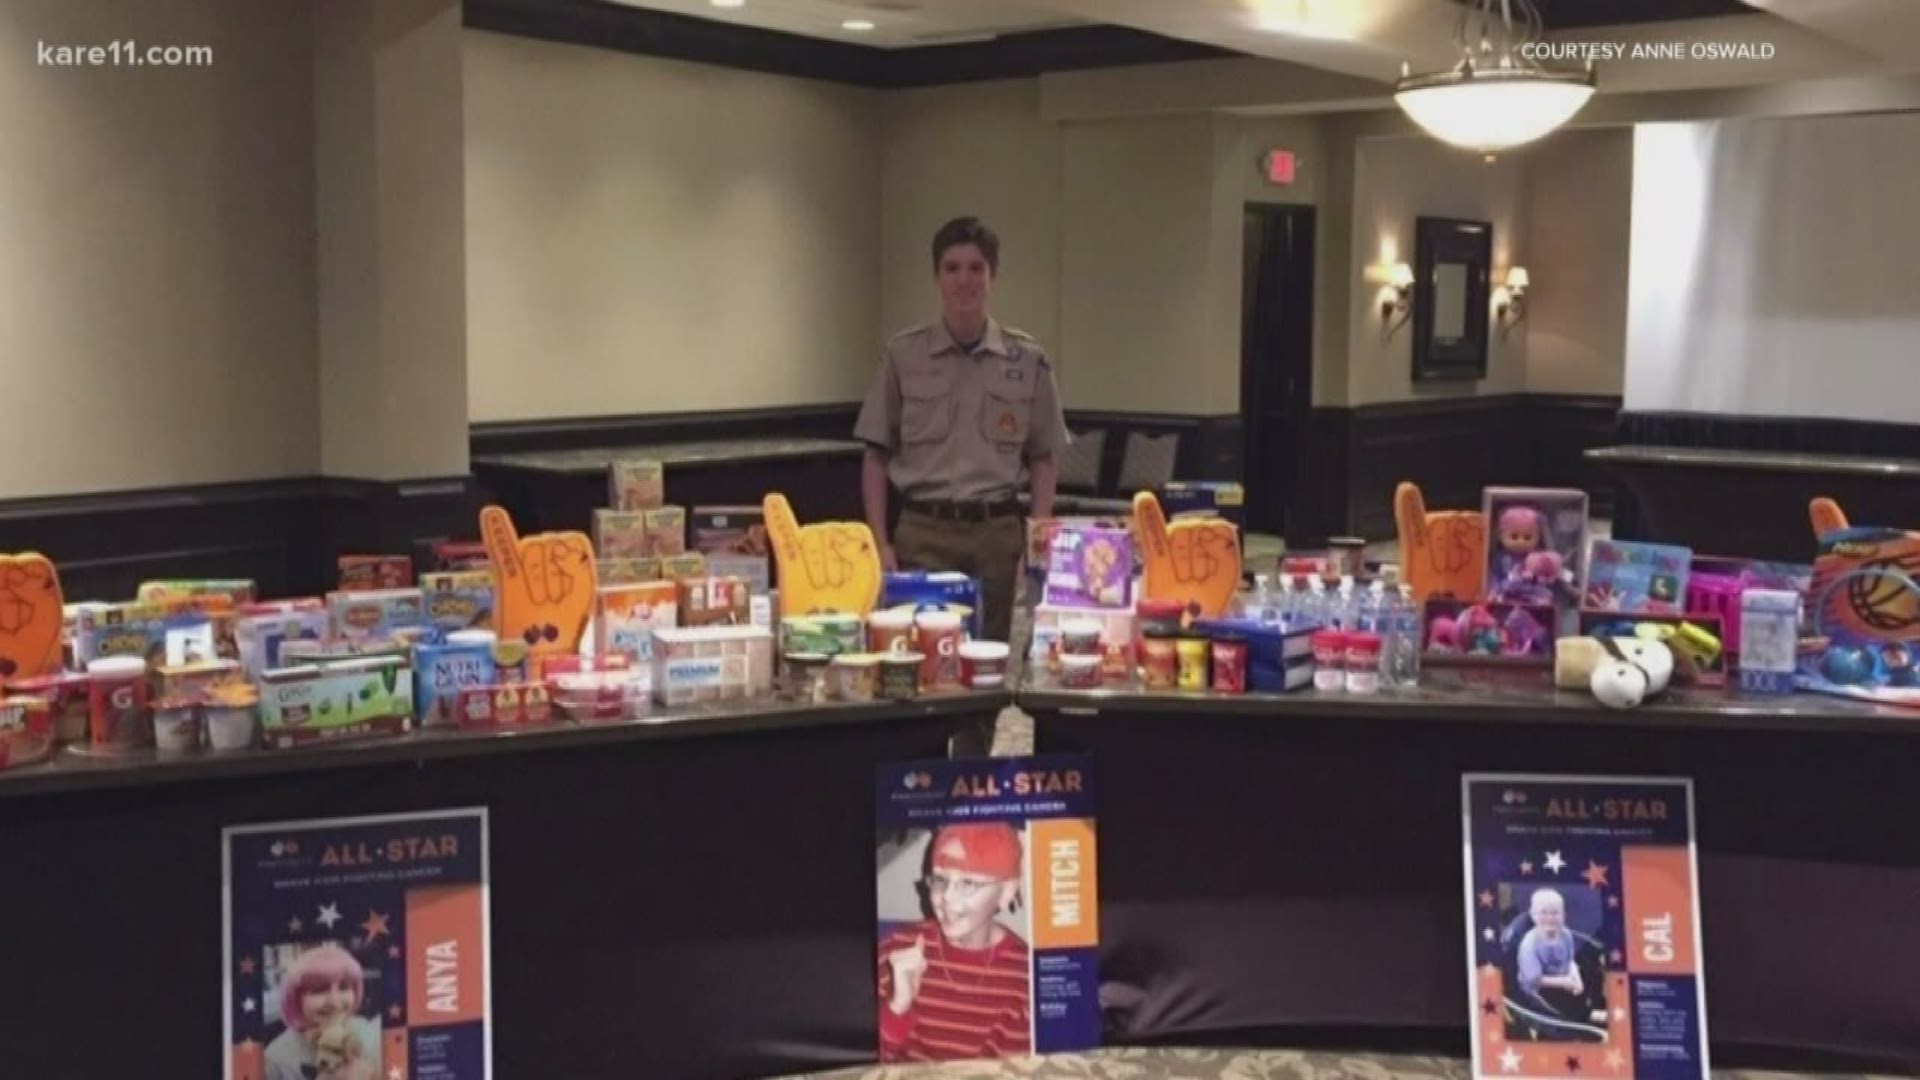 When 17-year-old Henry Oswald was looking for an Eagle Scout project, he found the Pinky Swear Pantries.